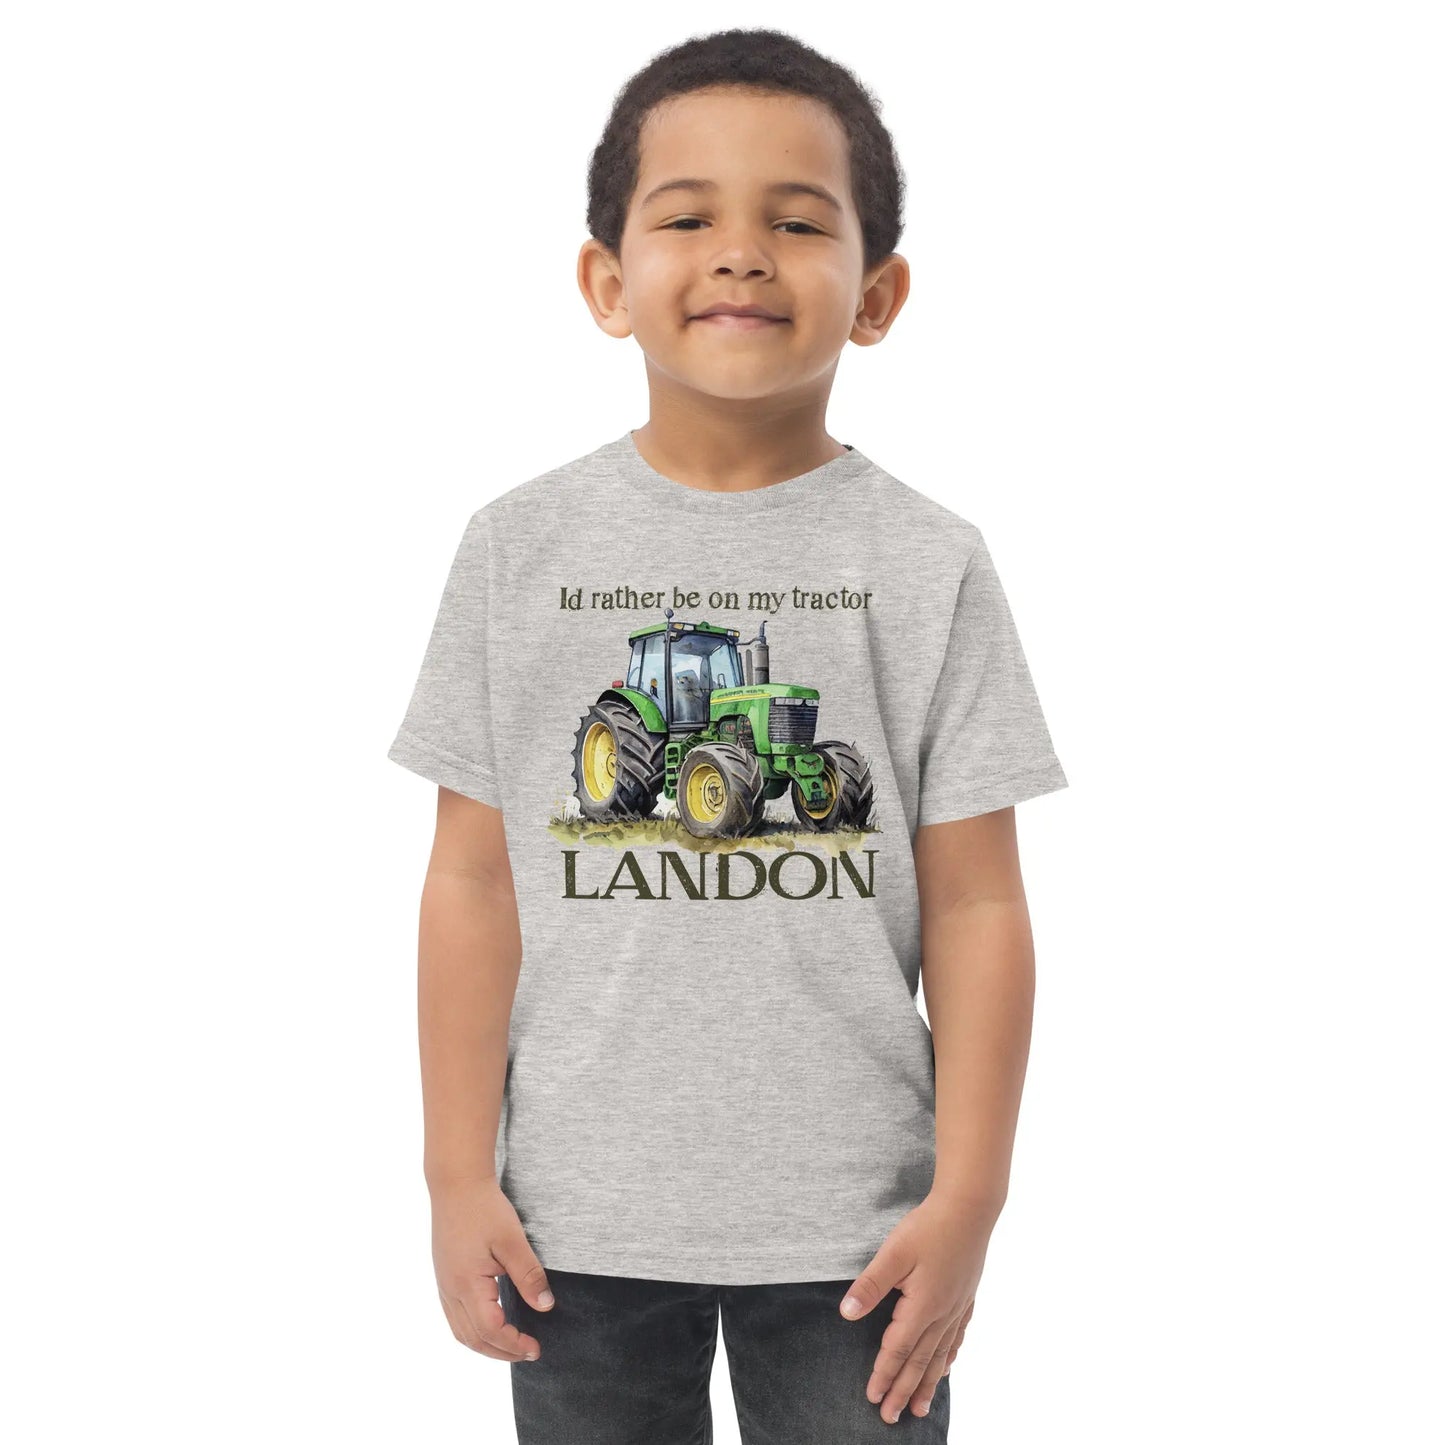 Personalized Tractor Toddler t-shirt, Farm Tractor Shirt Amazing Faith Designs